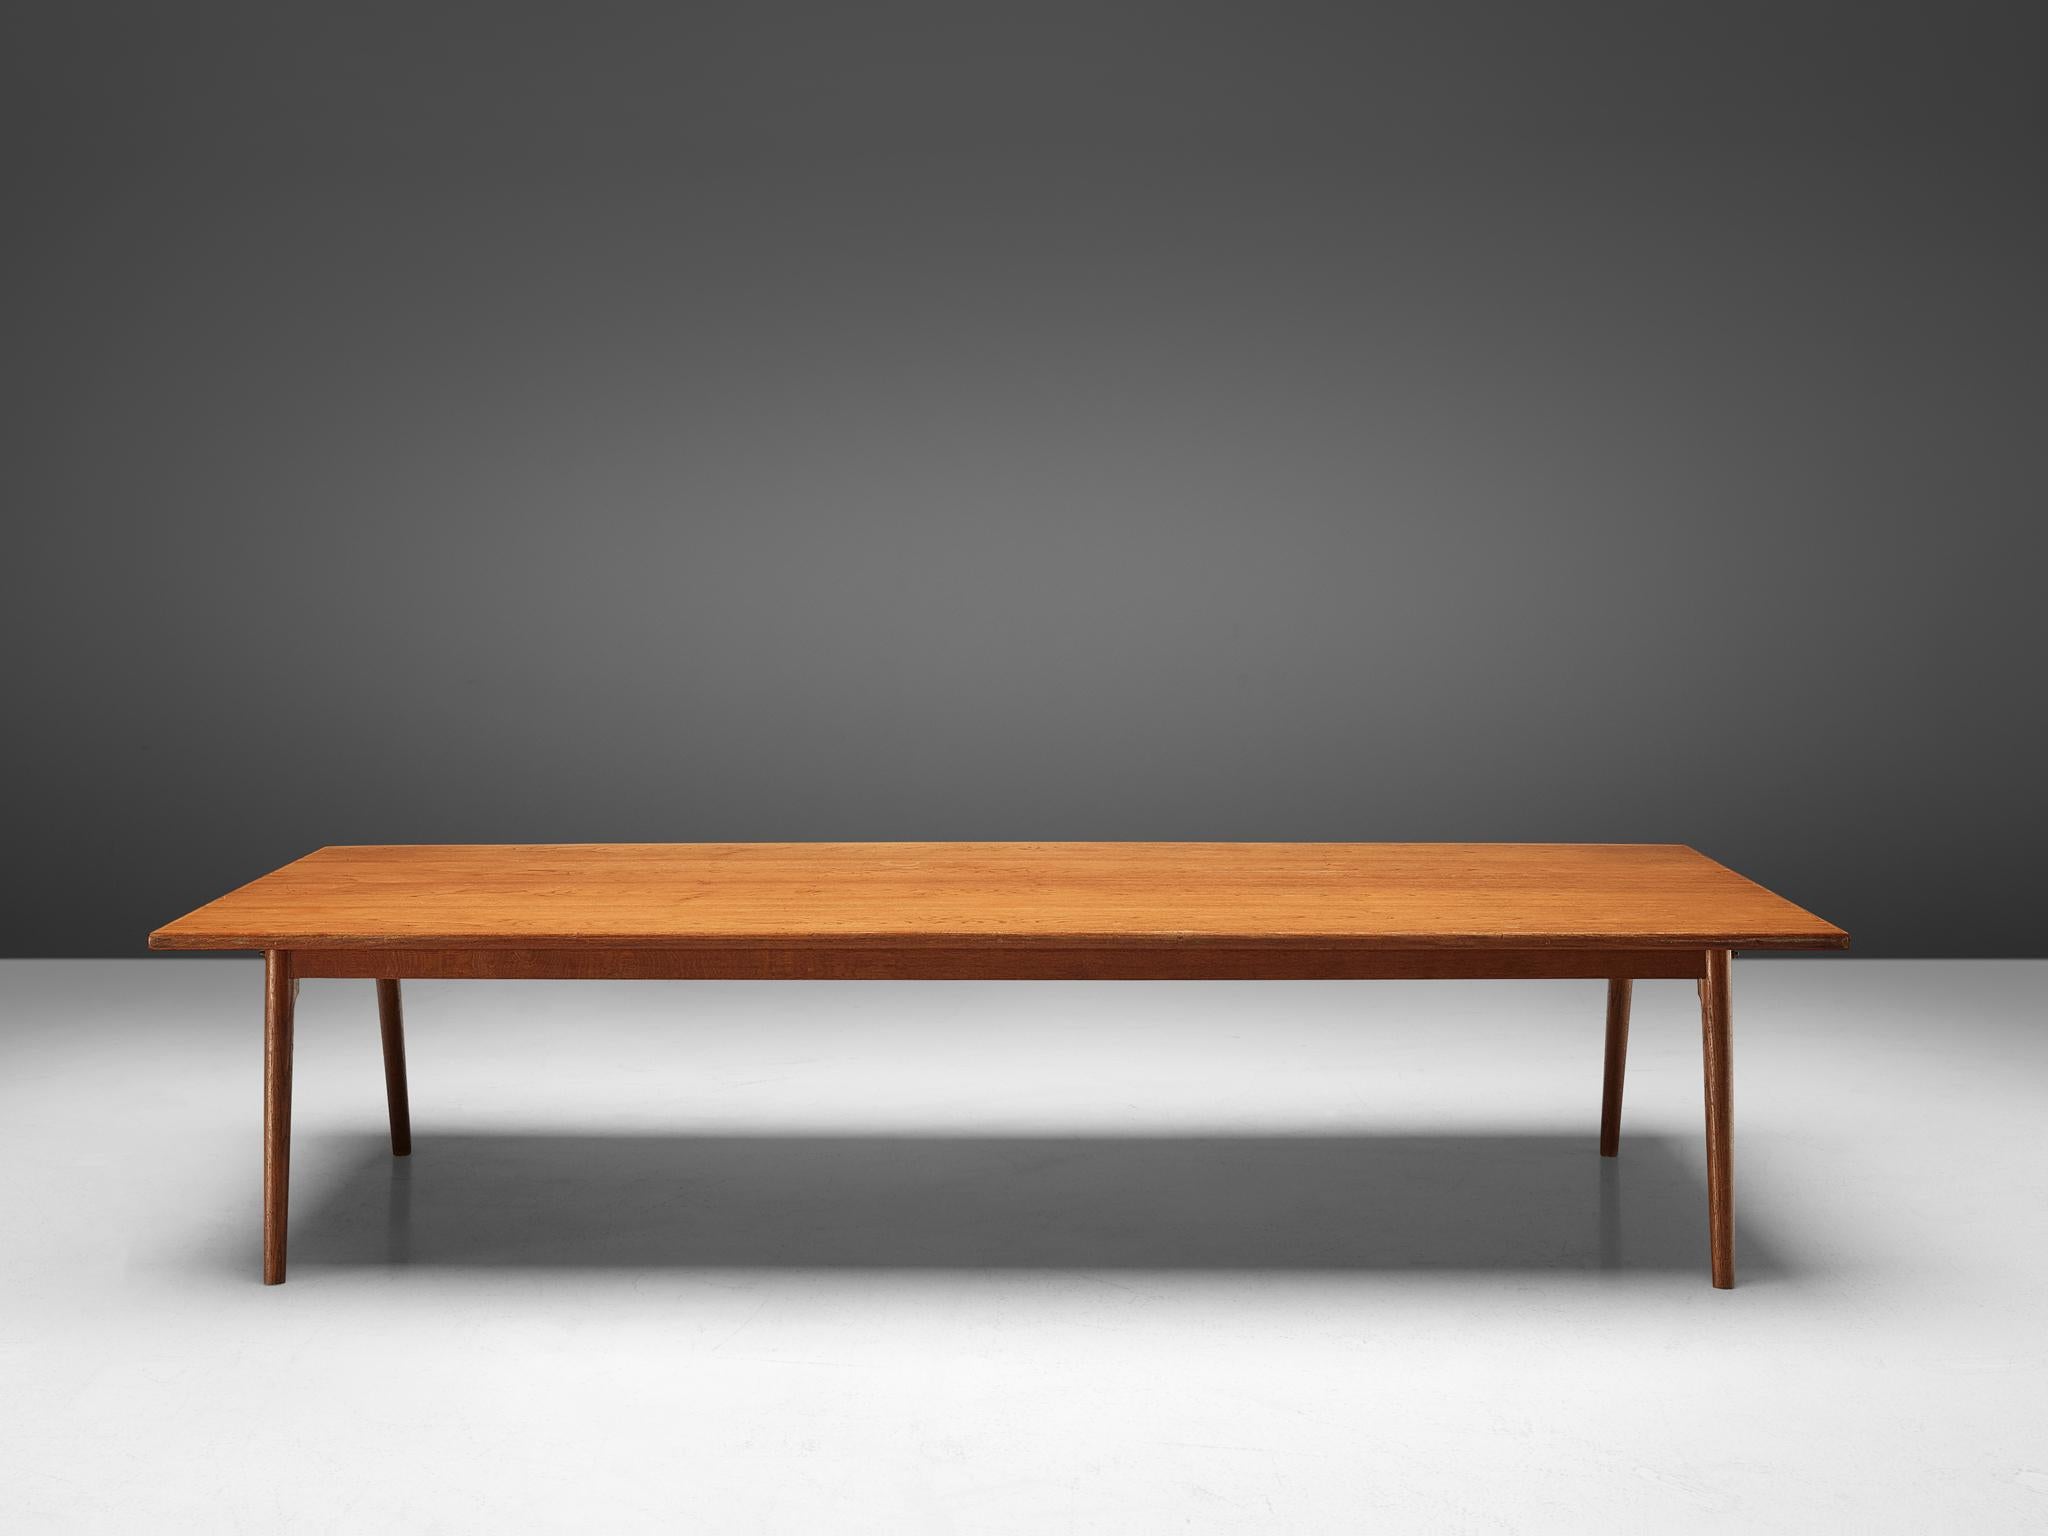 Conference table or dining table, oak, Denmark, 1950s.

Large conference- or dining table in oak. The rectangular shaped tabletop is made out of one piece, featuring a beautiful grain. The base consists of four conical legs and shows beautiful